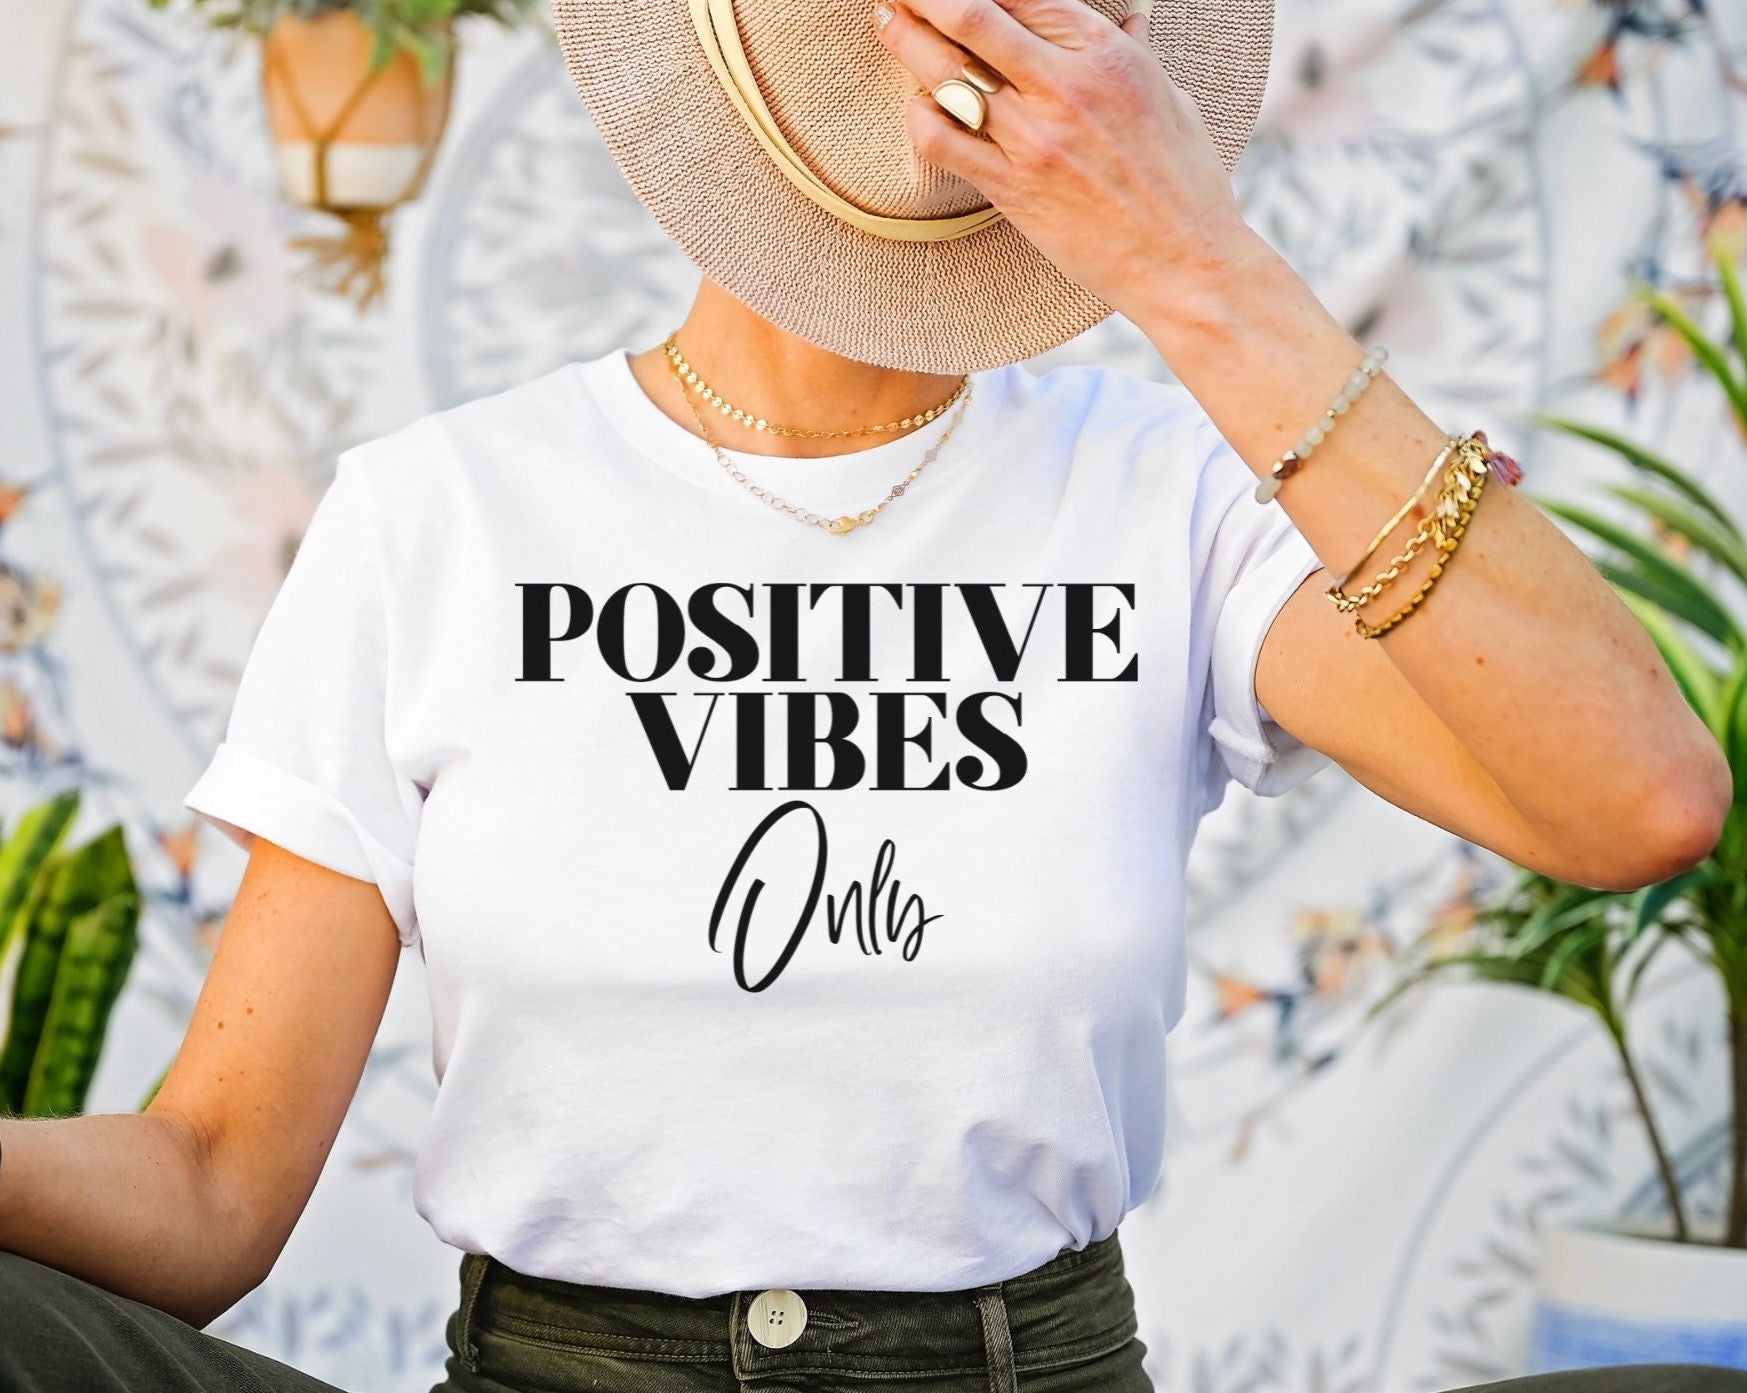 Positive Vibes Only T-Shirt, White Shirt, Black Text